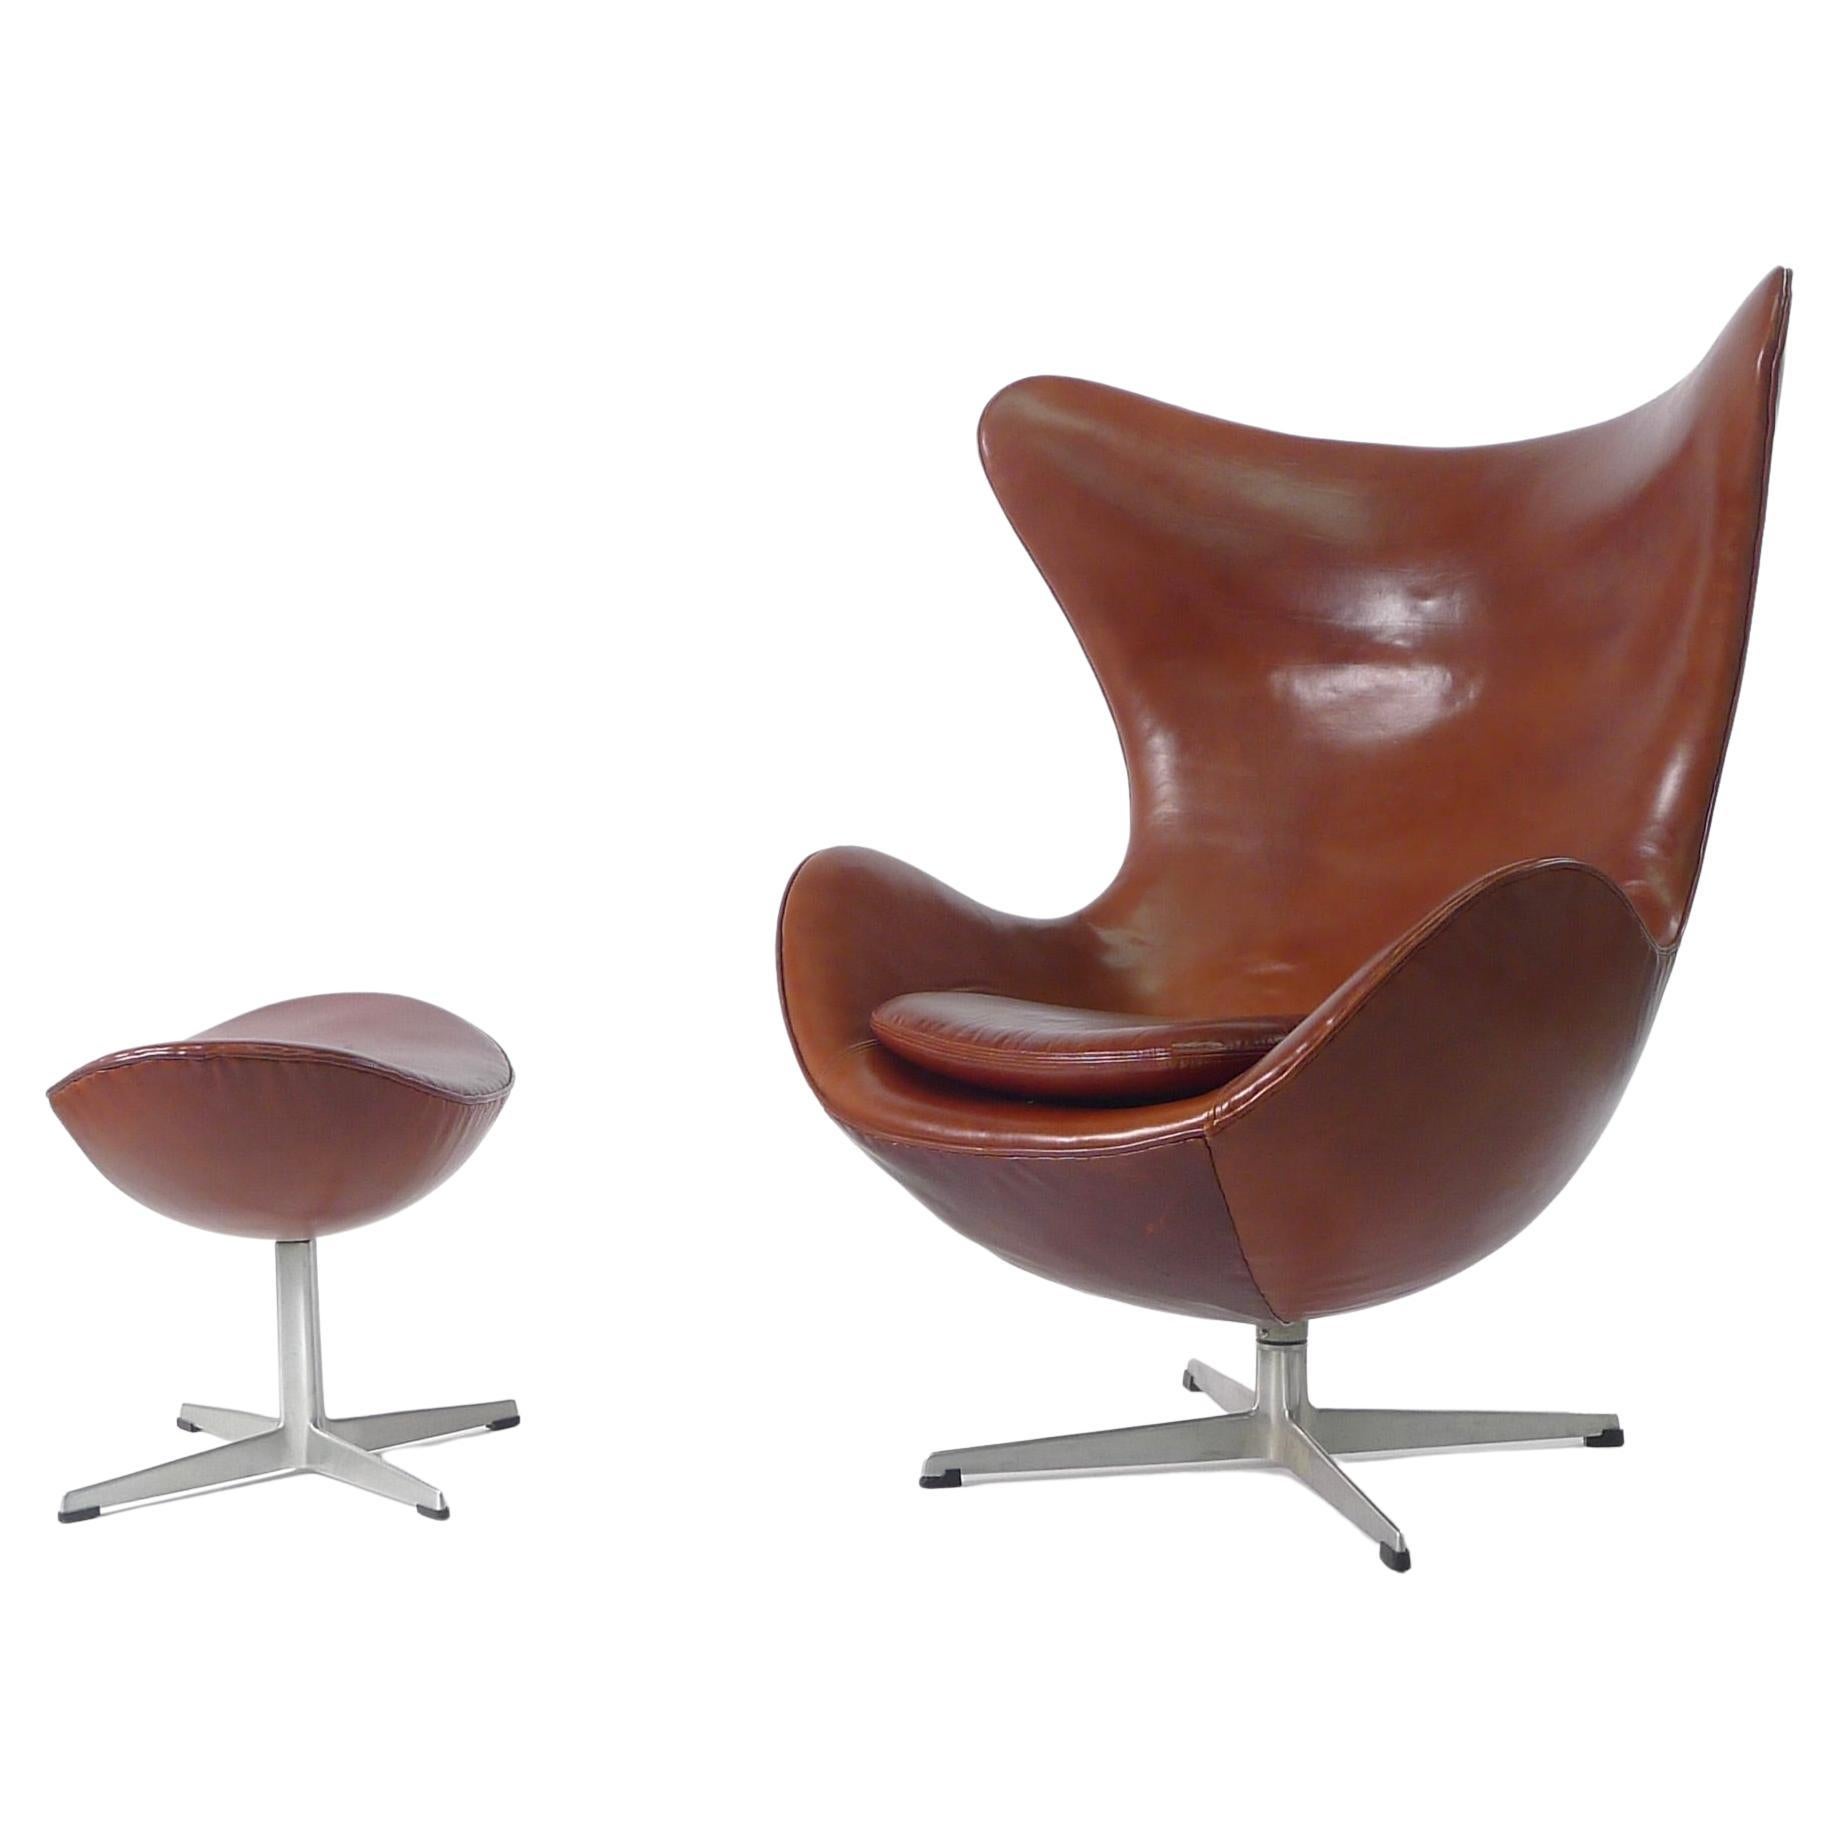 Early Egg Chair and Ottoman by Arne Jacobsen for Fritz Hansen, 1960s